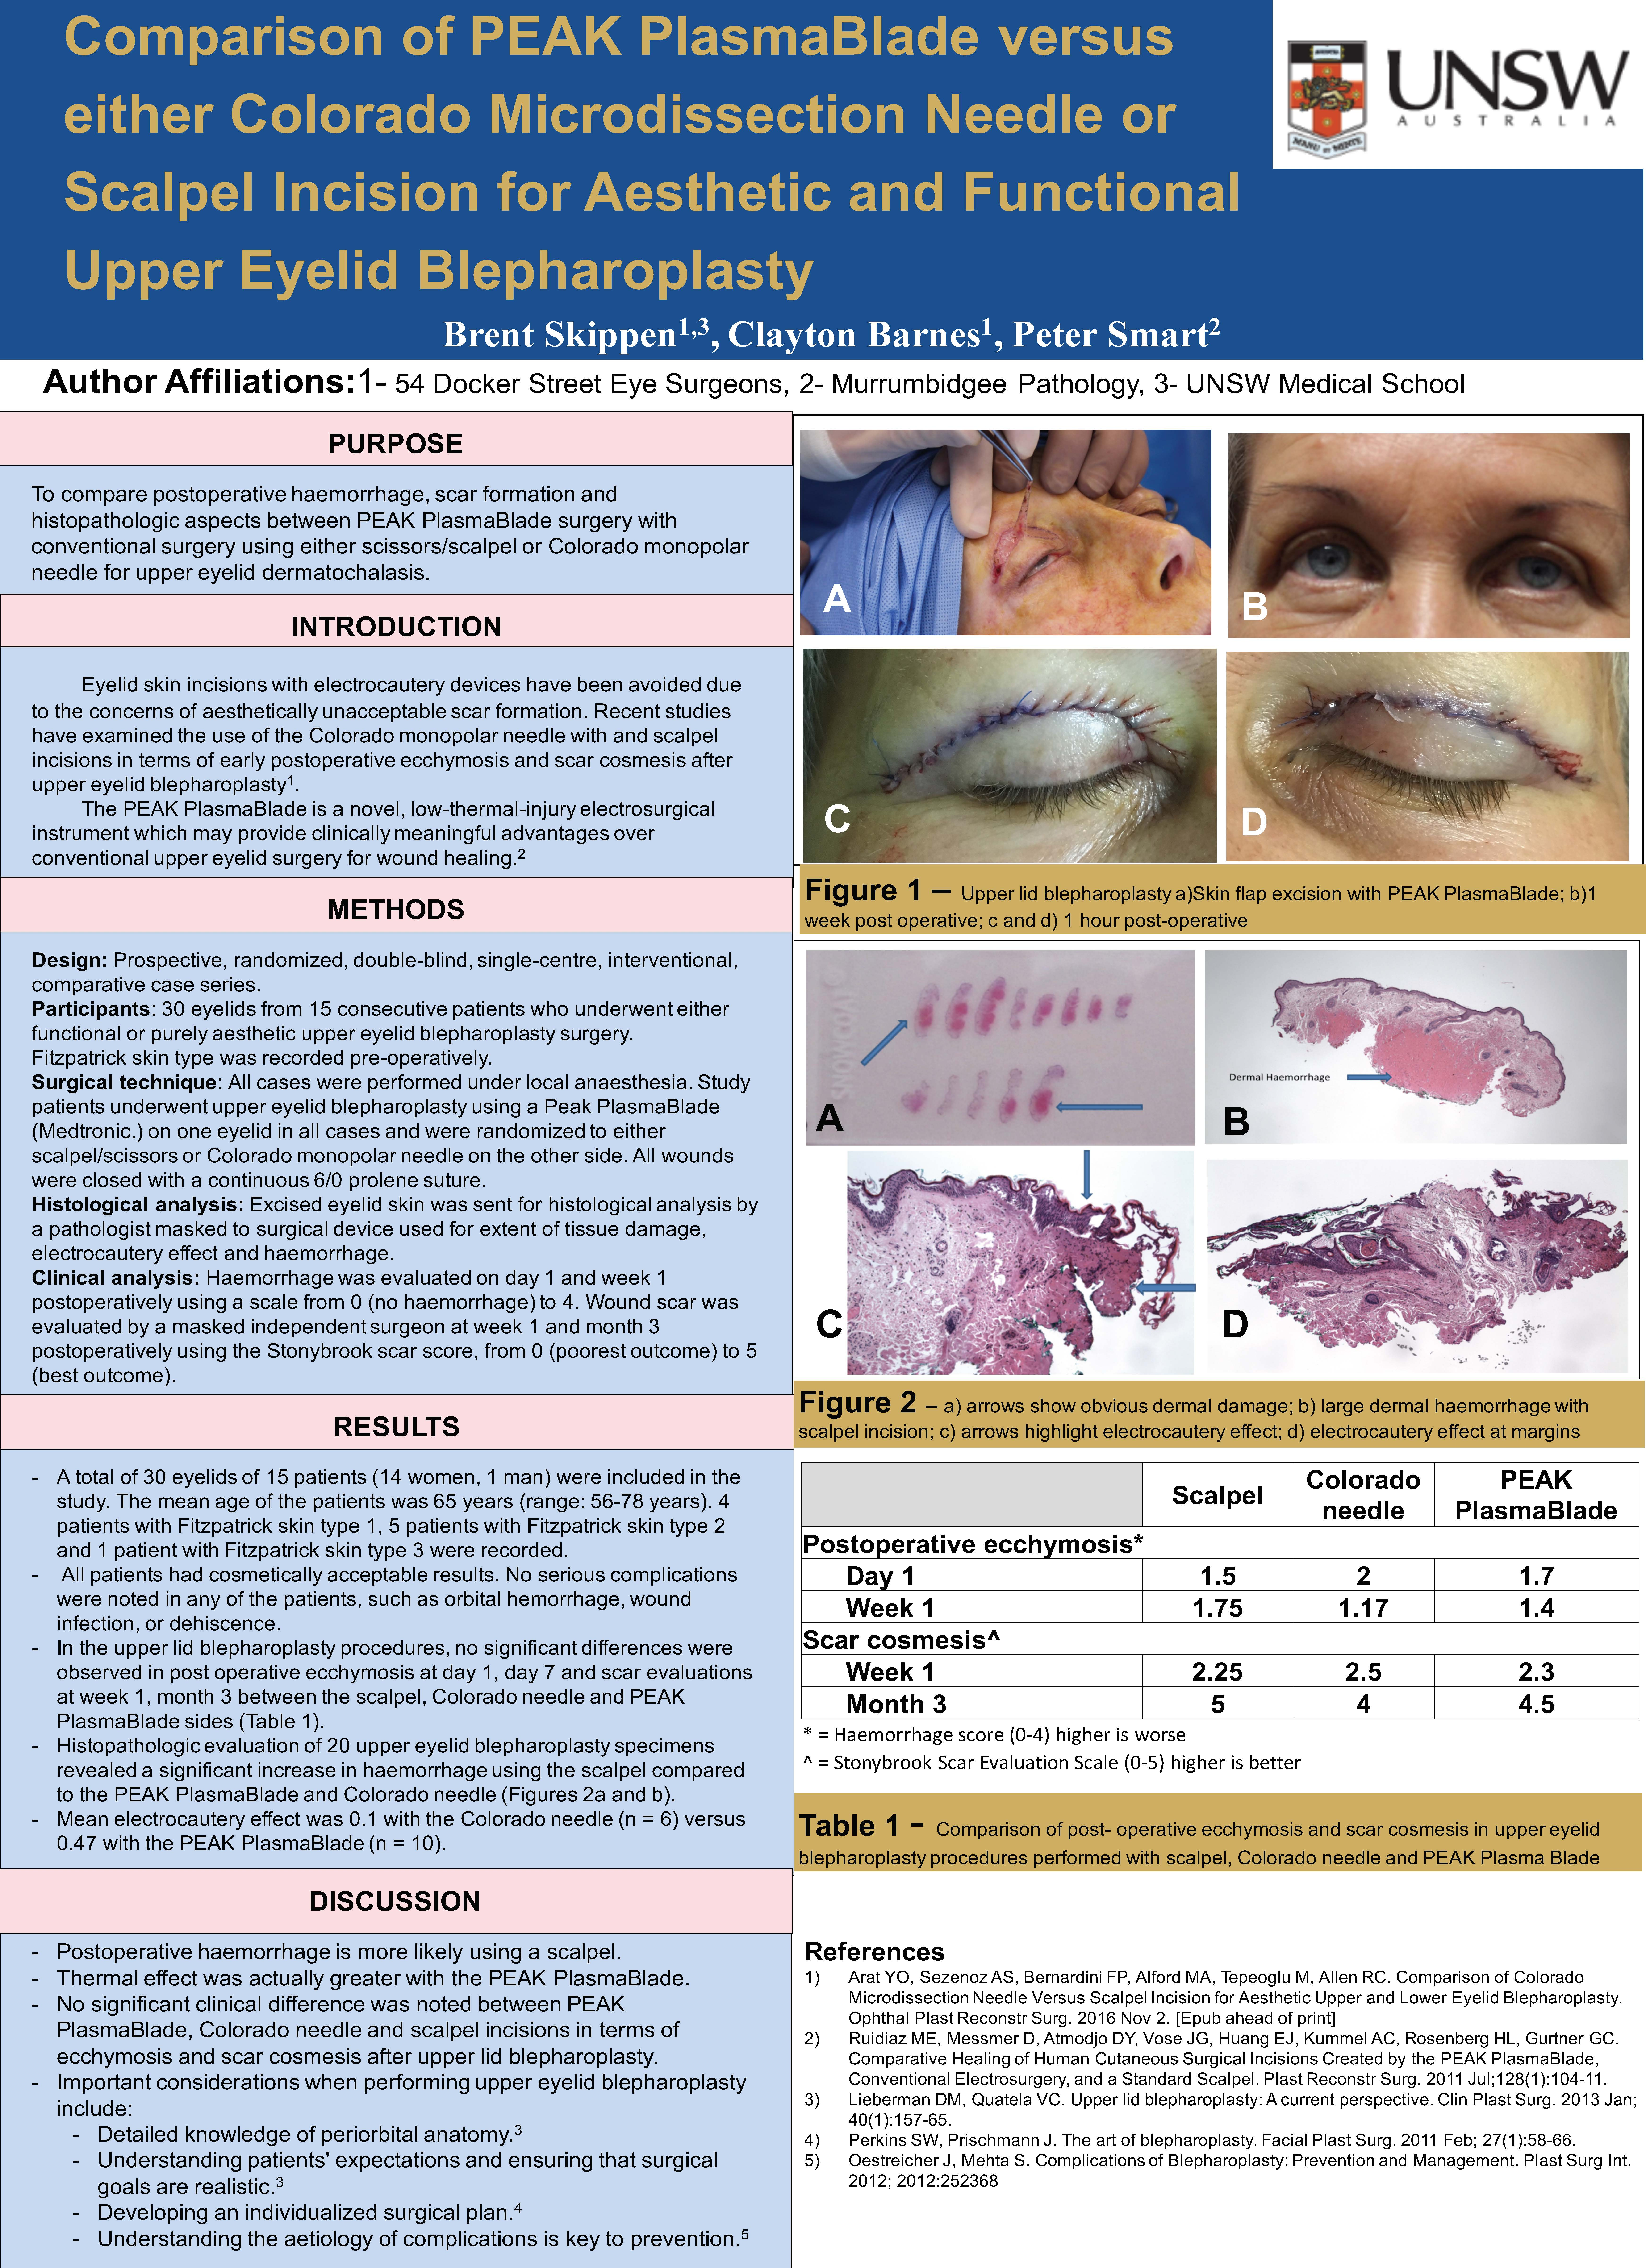 Comparison of PEAK PlasmaBlade versus either Colorado Microdissection Needle or Scalpel Incision for Aesthetic and Functional Upper Eyelid Blepharoplasty